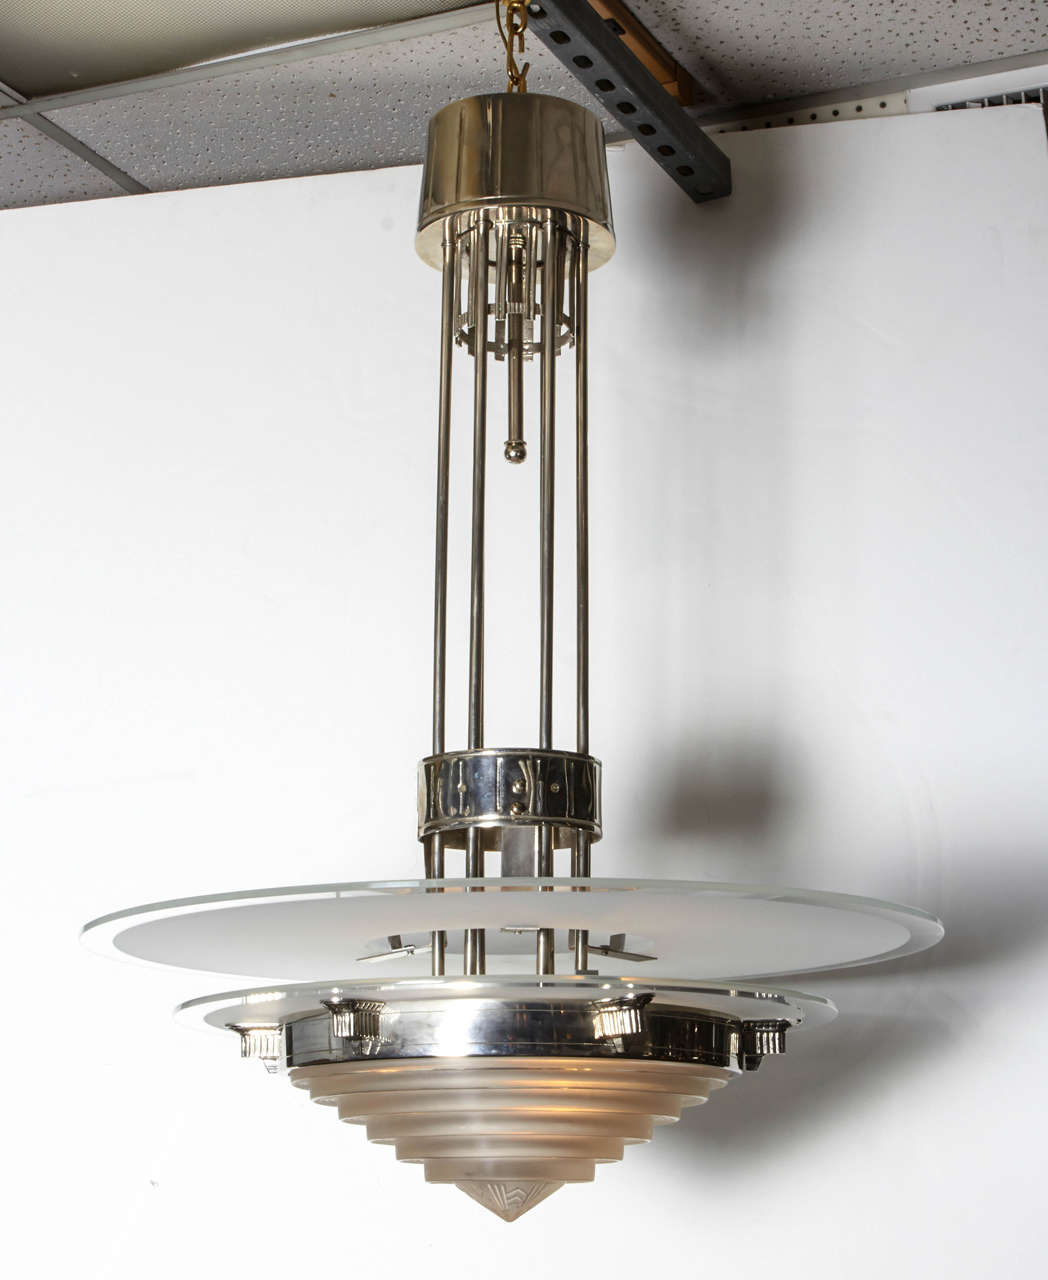 A Modernist, machine age chandelier in glass and polished nickeled bronze. Central concentric coupe and double disc top with wide supportive surround ending in a highly decorative stem and canopy.
The Industrial Design captures a Minimalist and